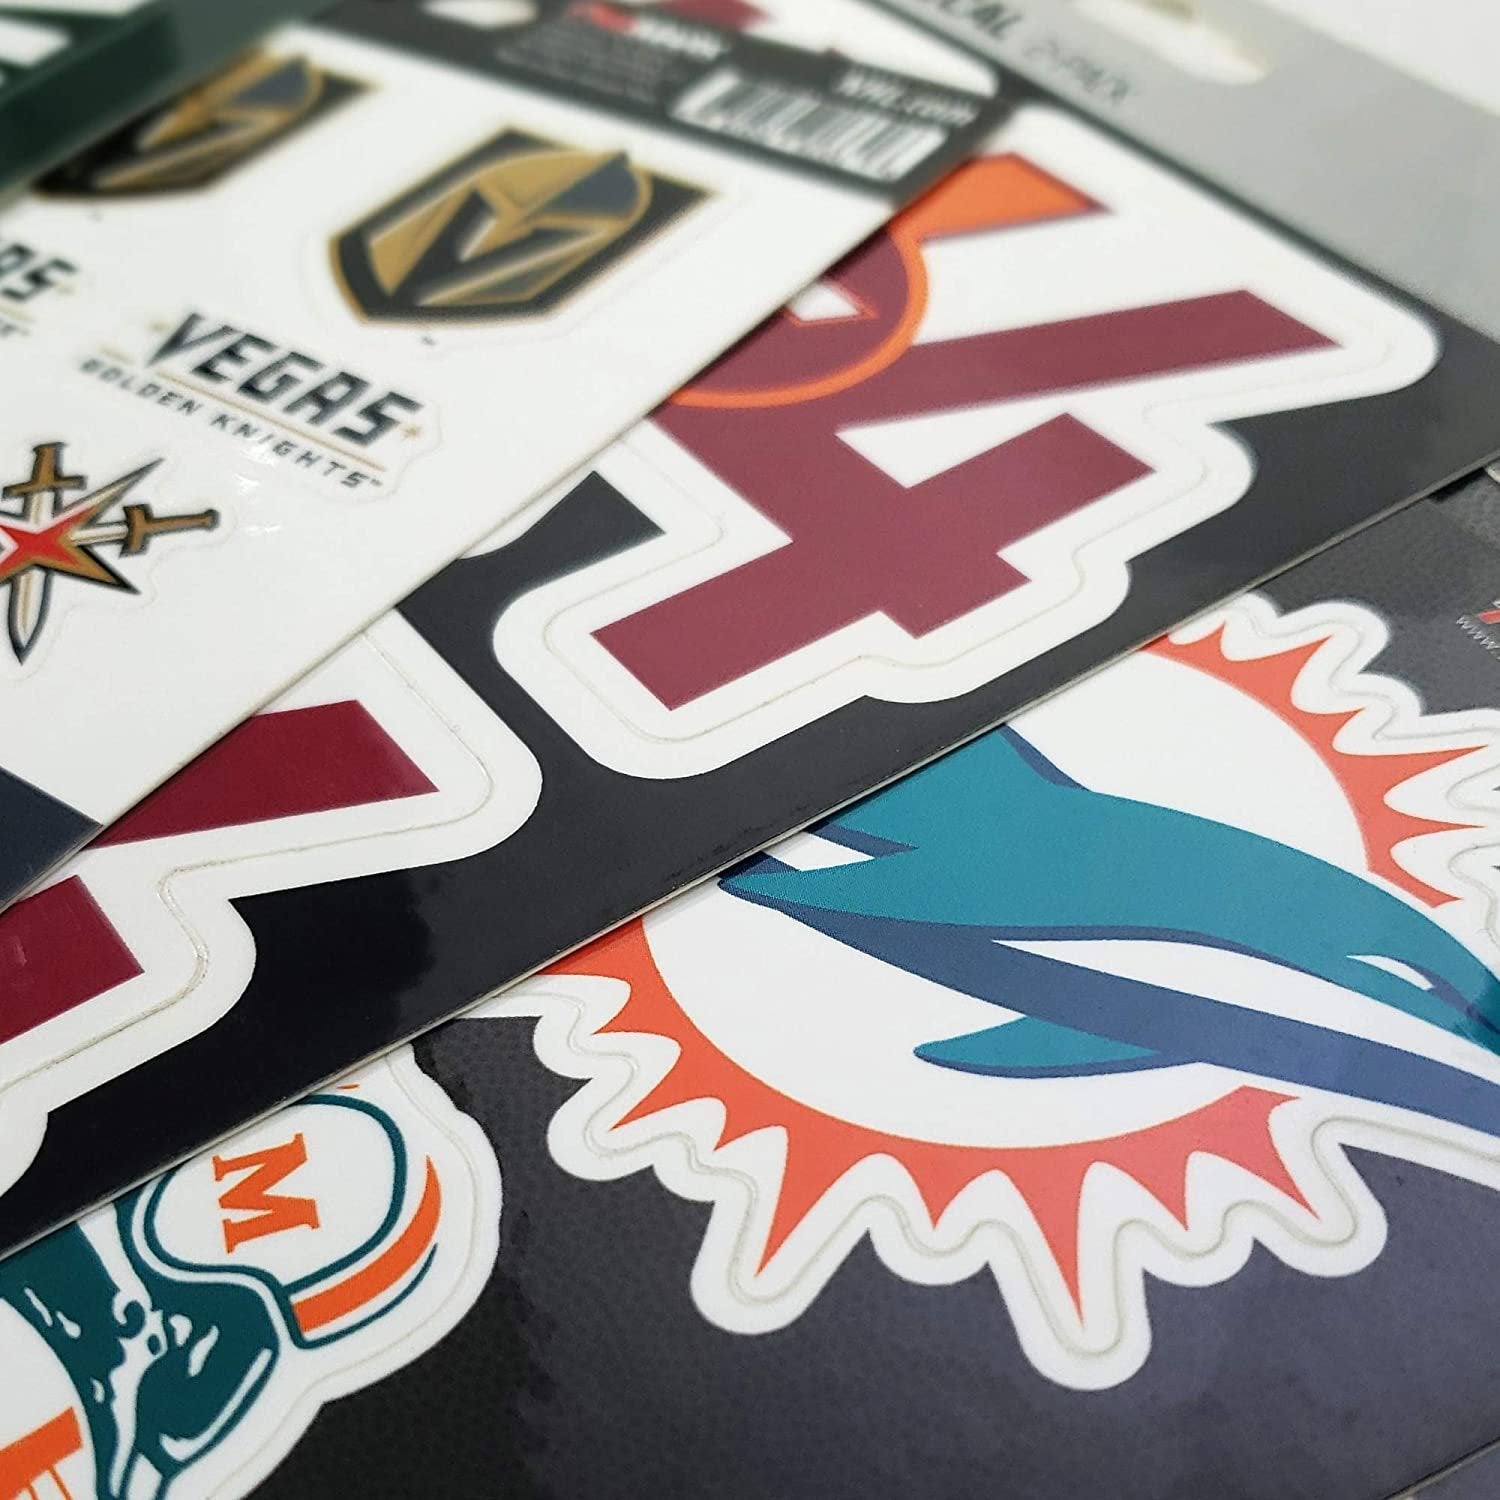 Miami Dolphins 6-Piece Decal Sticker Set, Vintage Retro Logo, 5x6 Inch Sheet, Gift for football fans for any hard surfaces around home, automotive, personal items